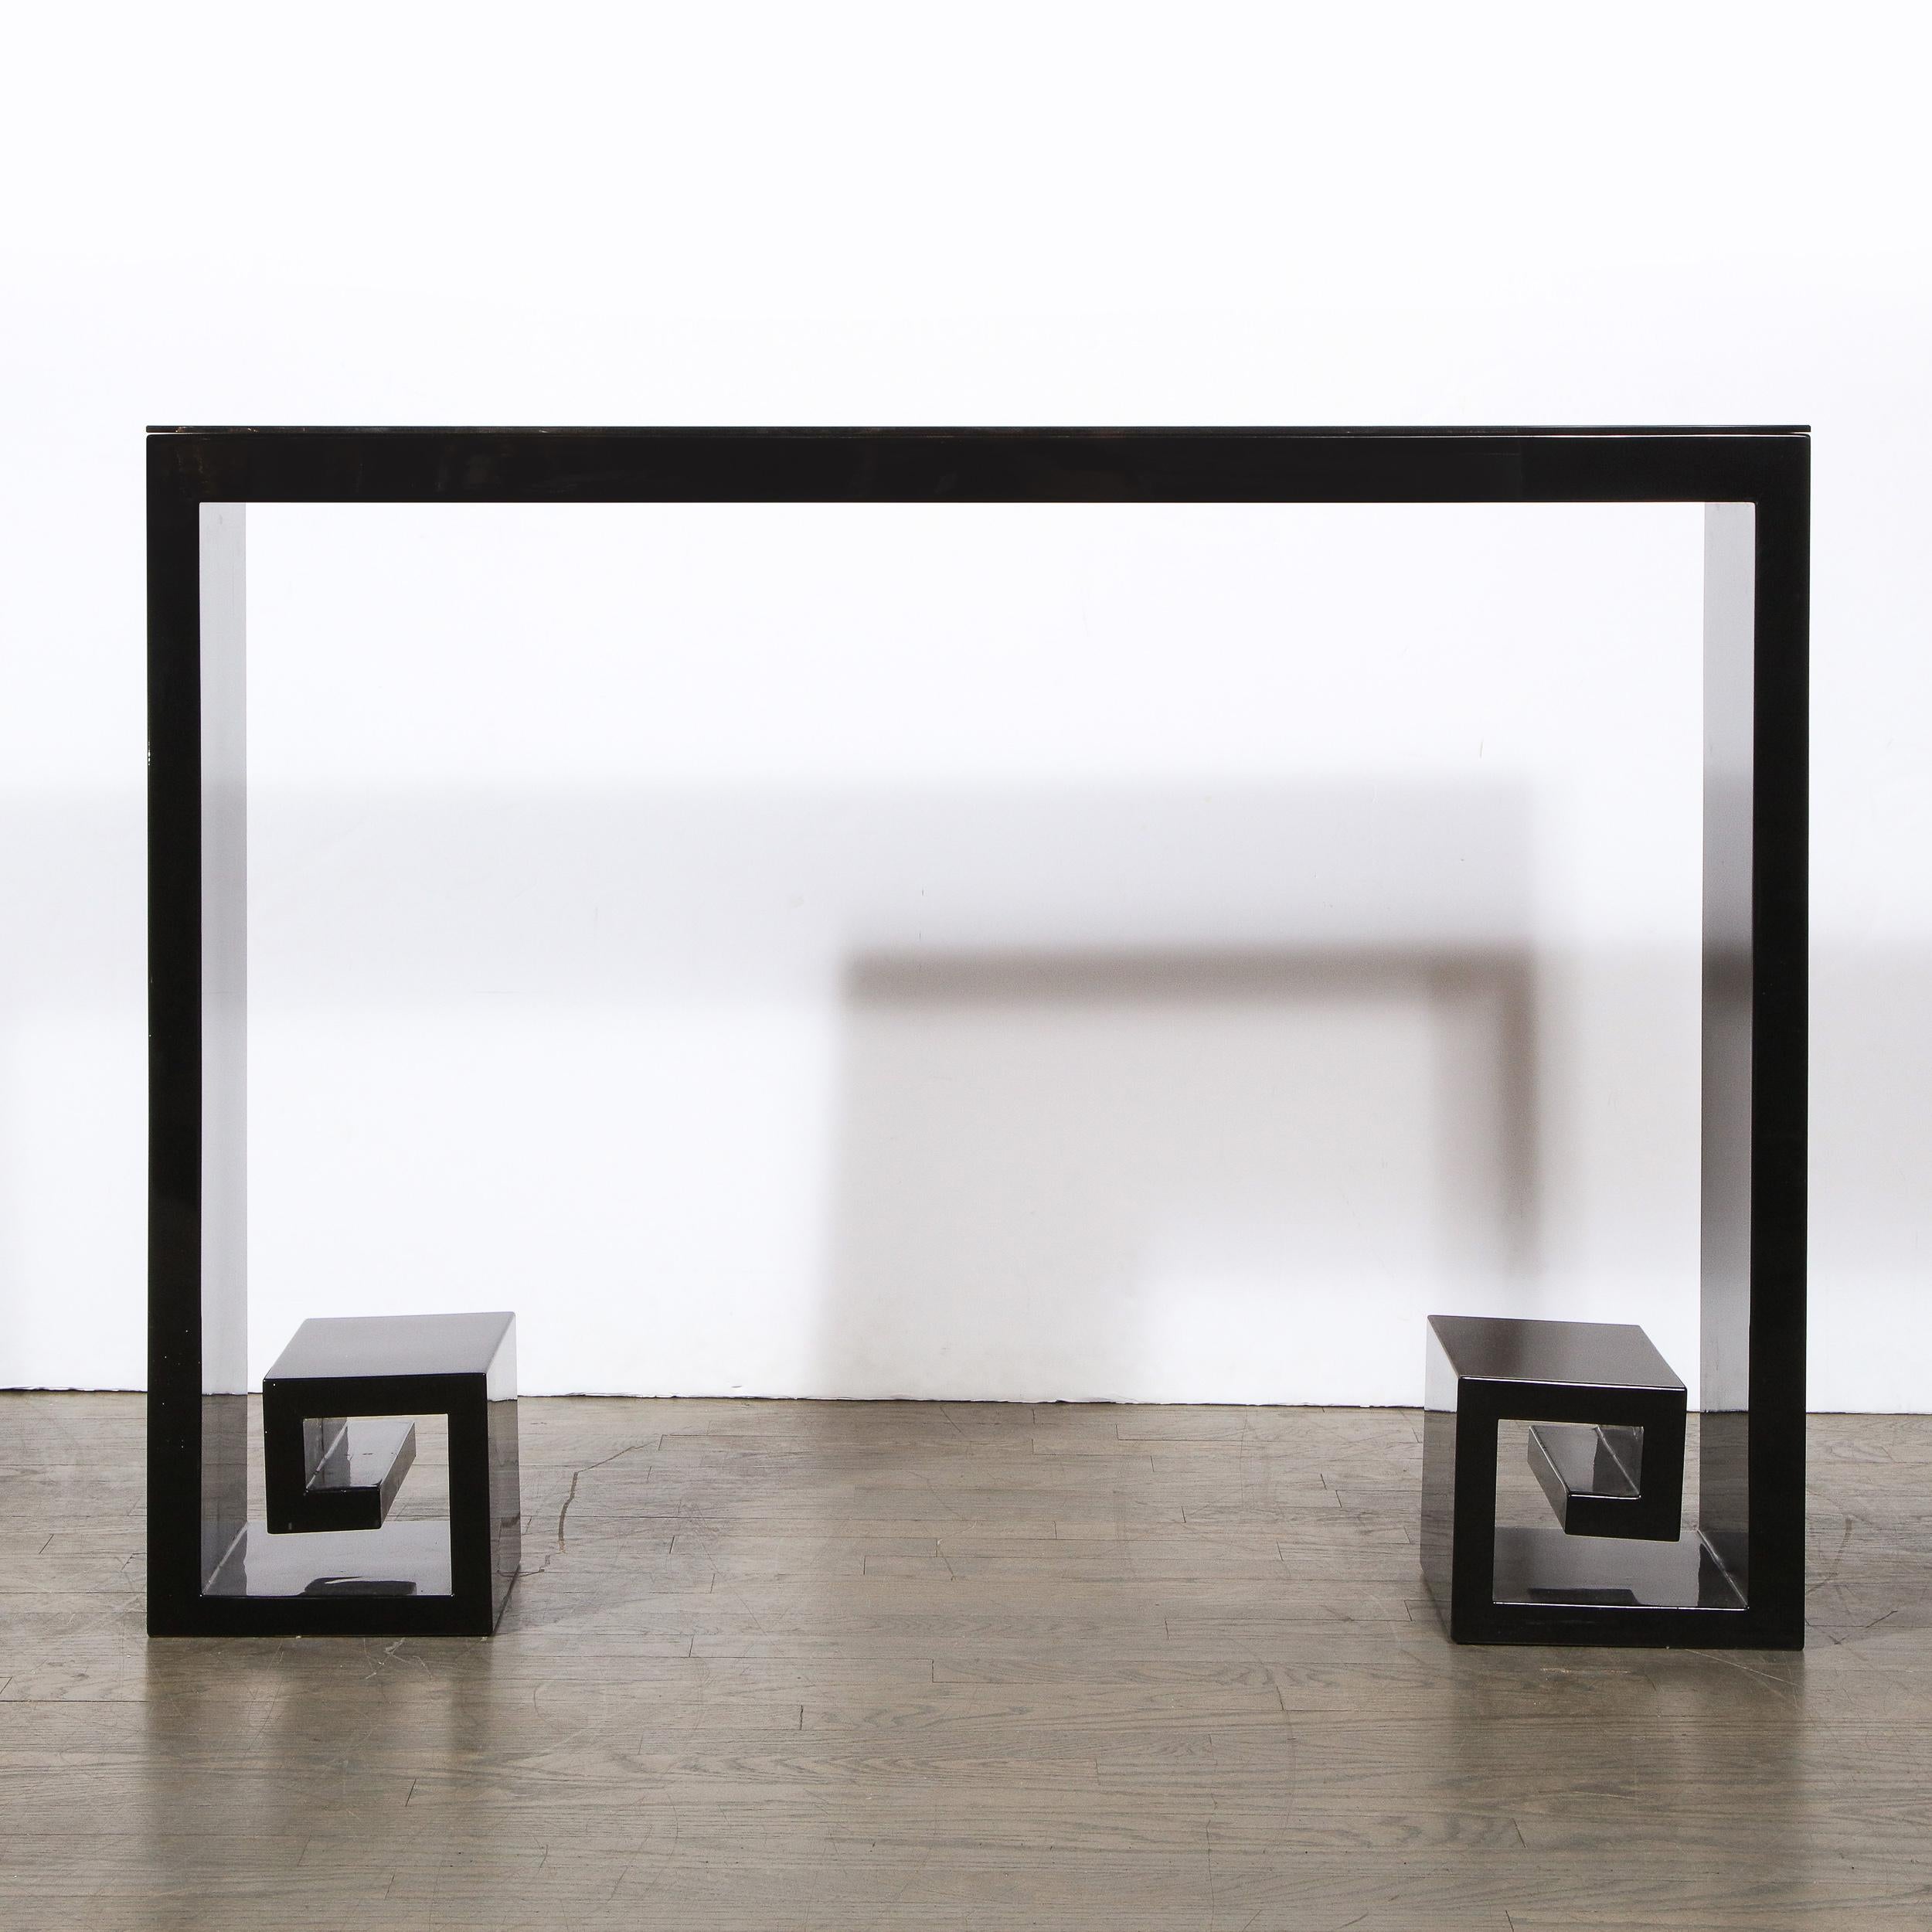 This stunning modernist black lacquer console was realized by artisans in New York state. It offers an open square form with stylized Greek key detailing at its base and a rectangular drawer in its centre. With its classically inspired form and